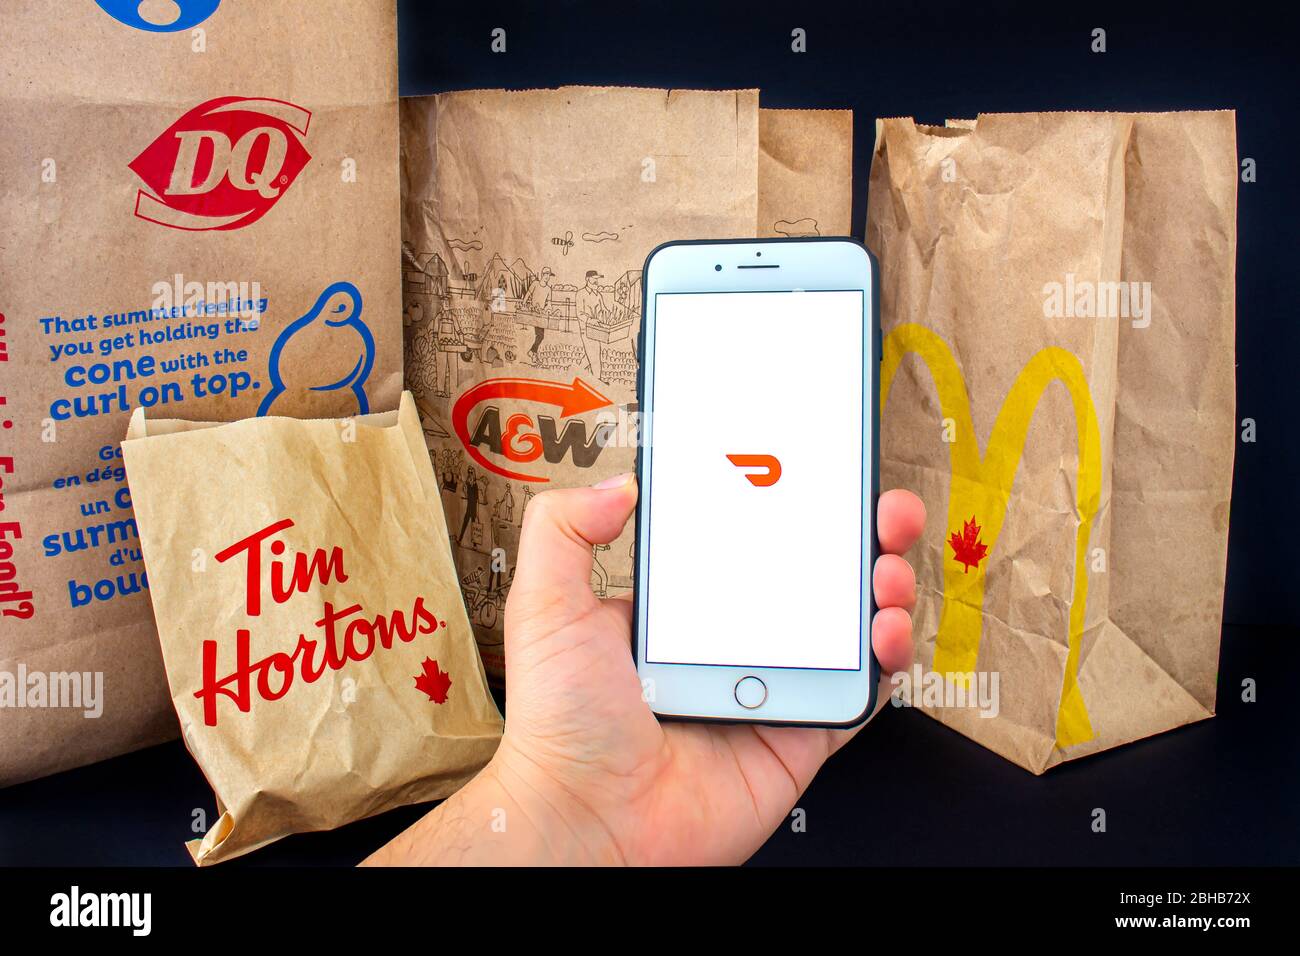 Calgary, Alberta. Canada. April 24, 2020: A person holding an iPhone Plus with the Door Dash application open with delivered food bags from Tim Hourto Stock Photo